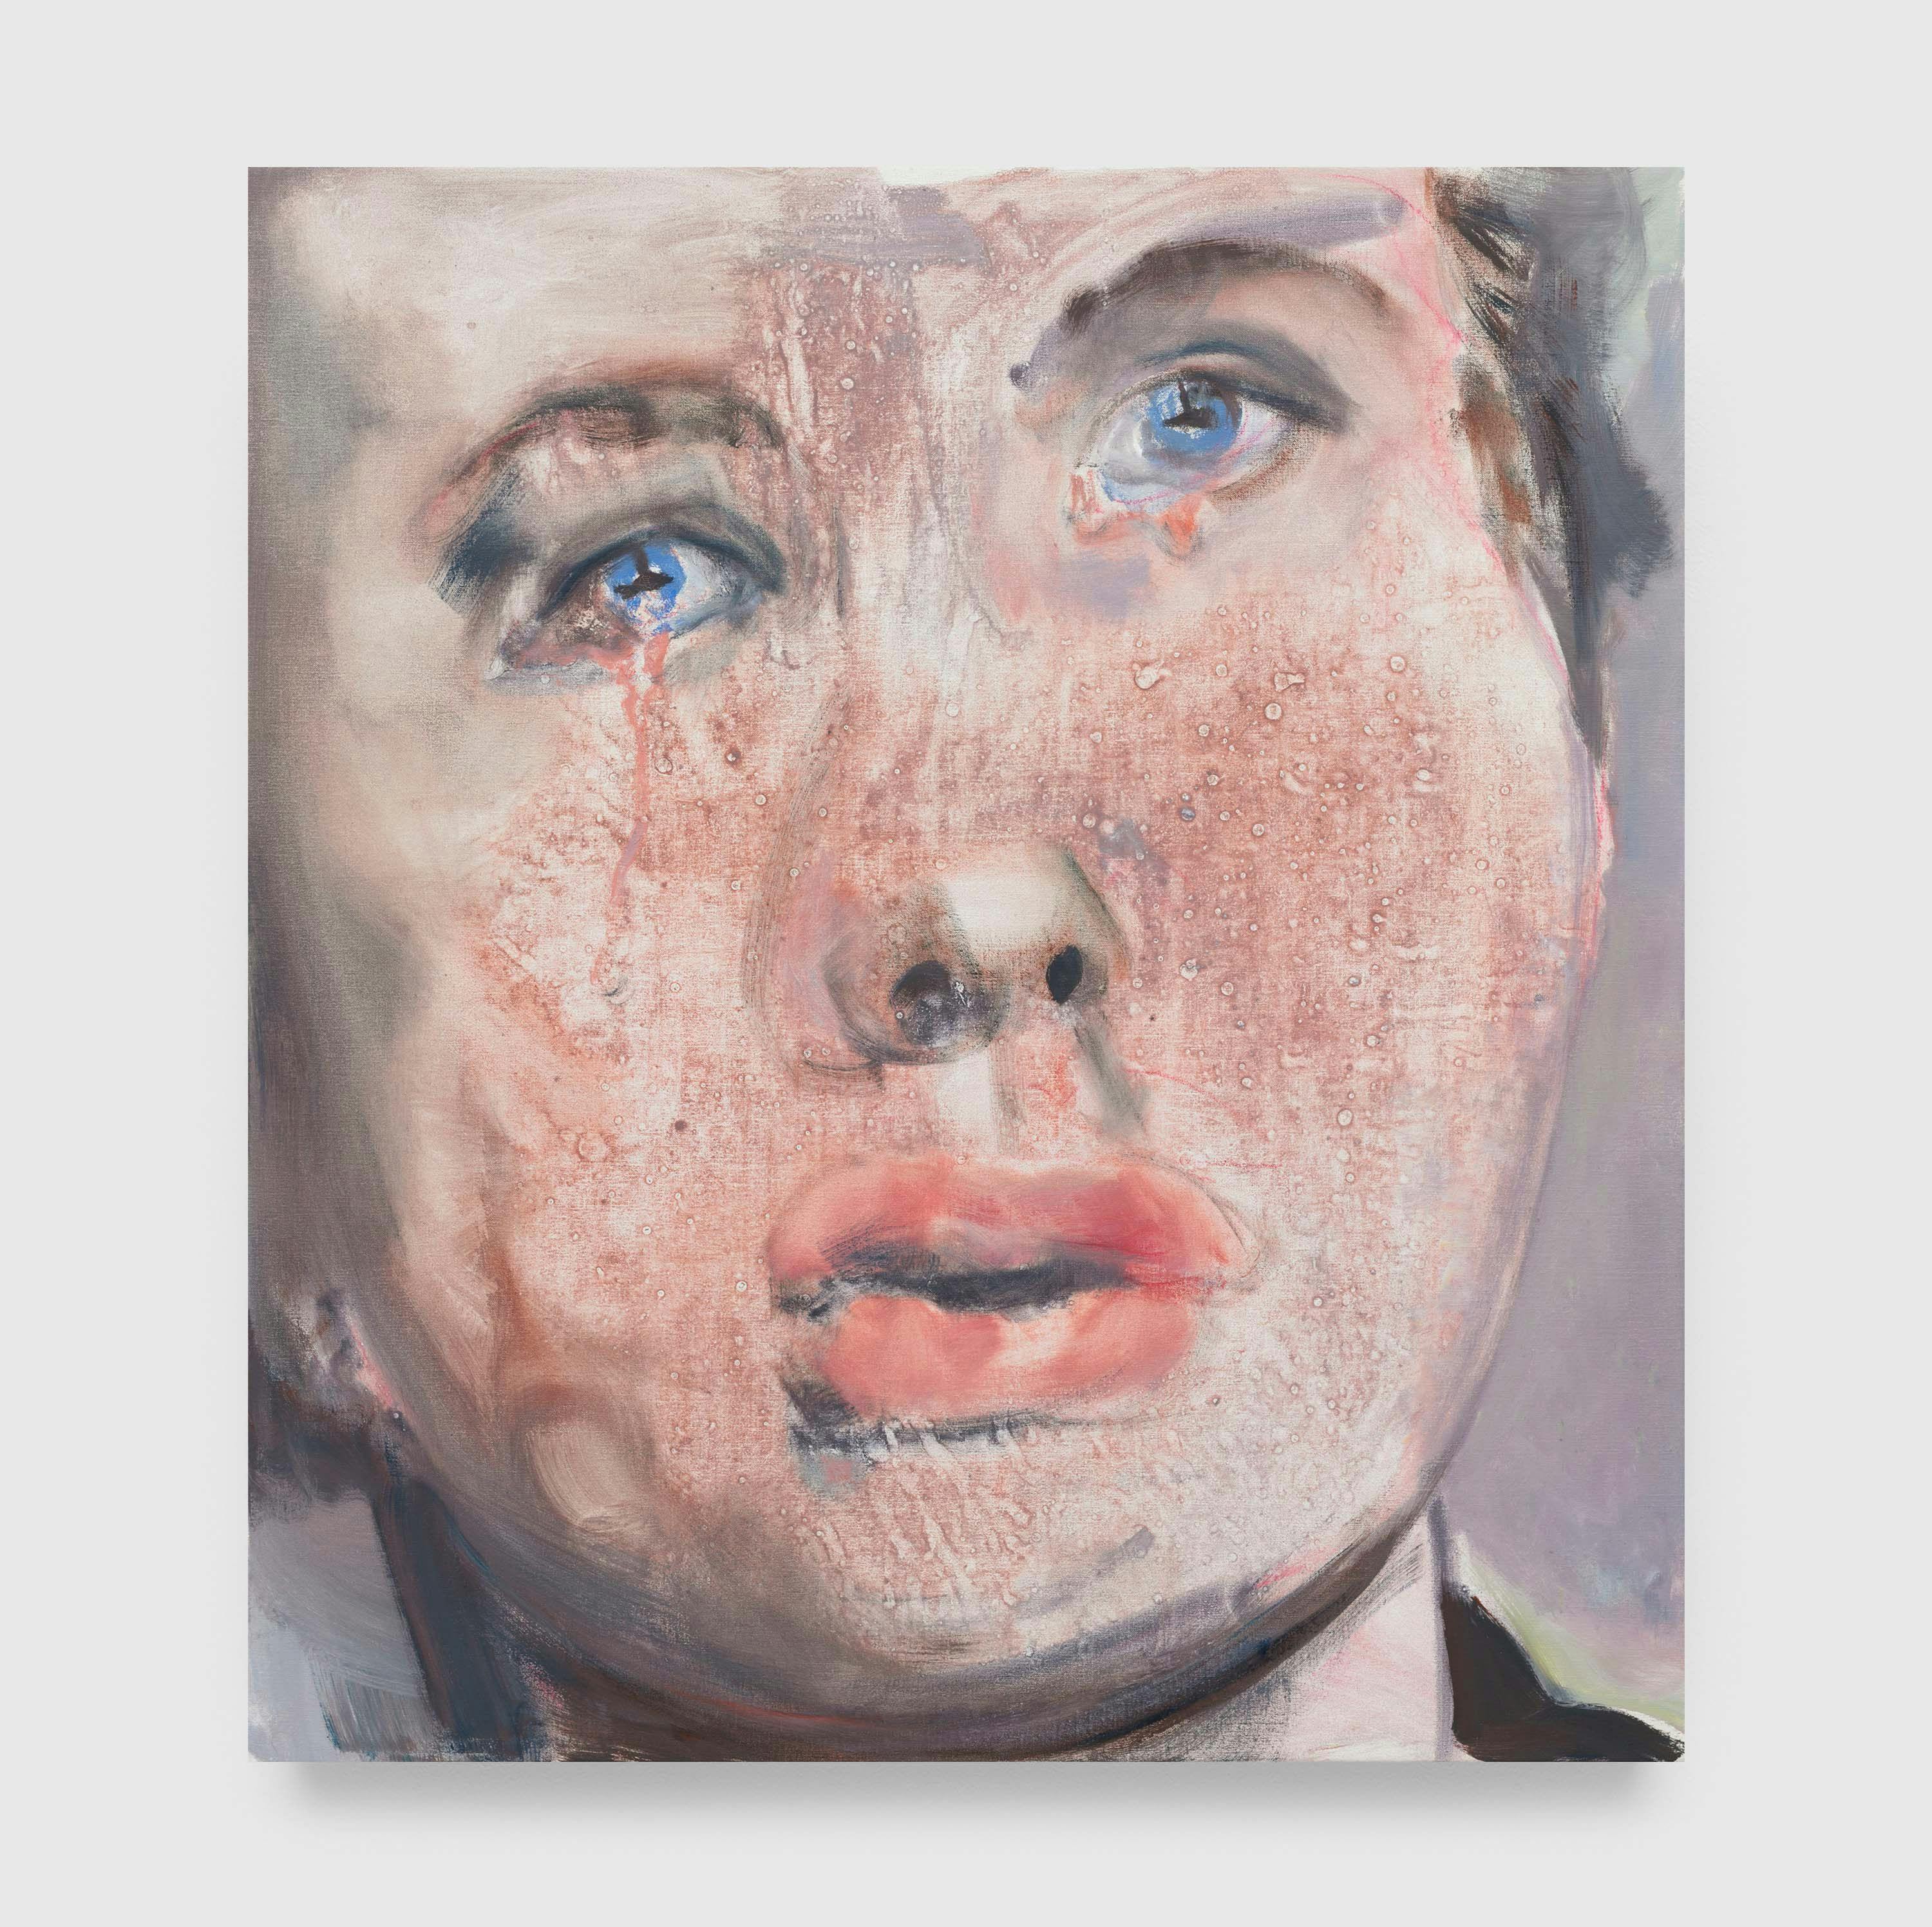 A painting by Marlene Dumas, titled For Whom the Bell Tolls, dated 2008.